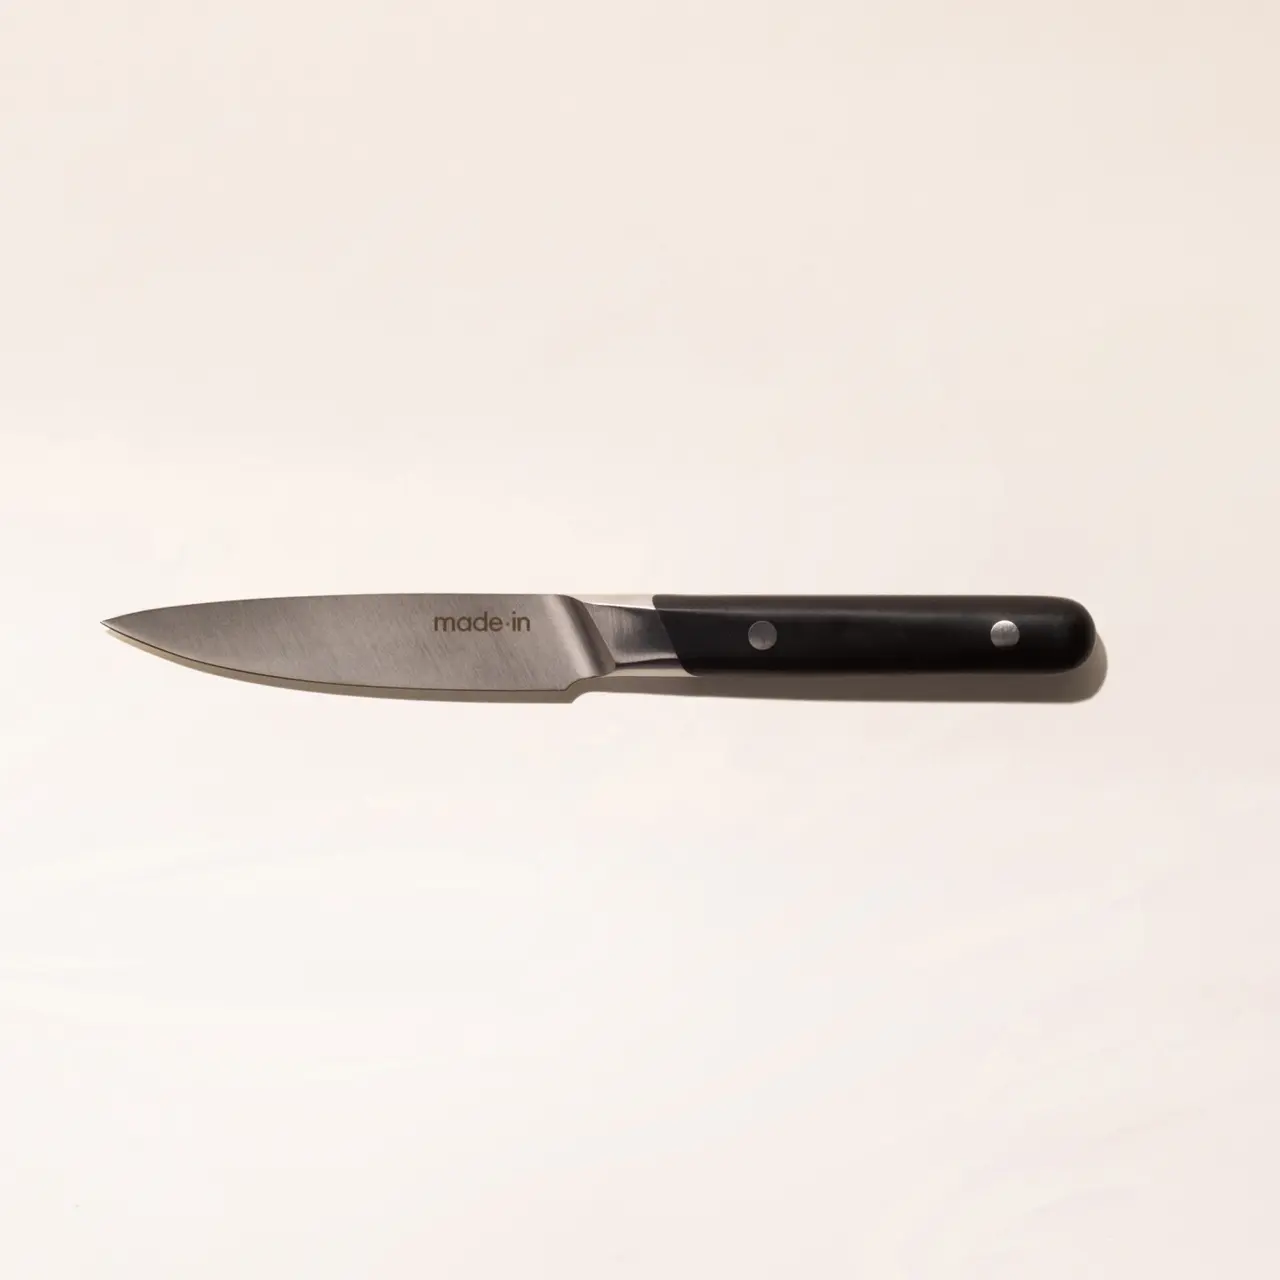 A paring knife with a black handle on a pale background.